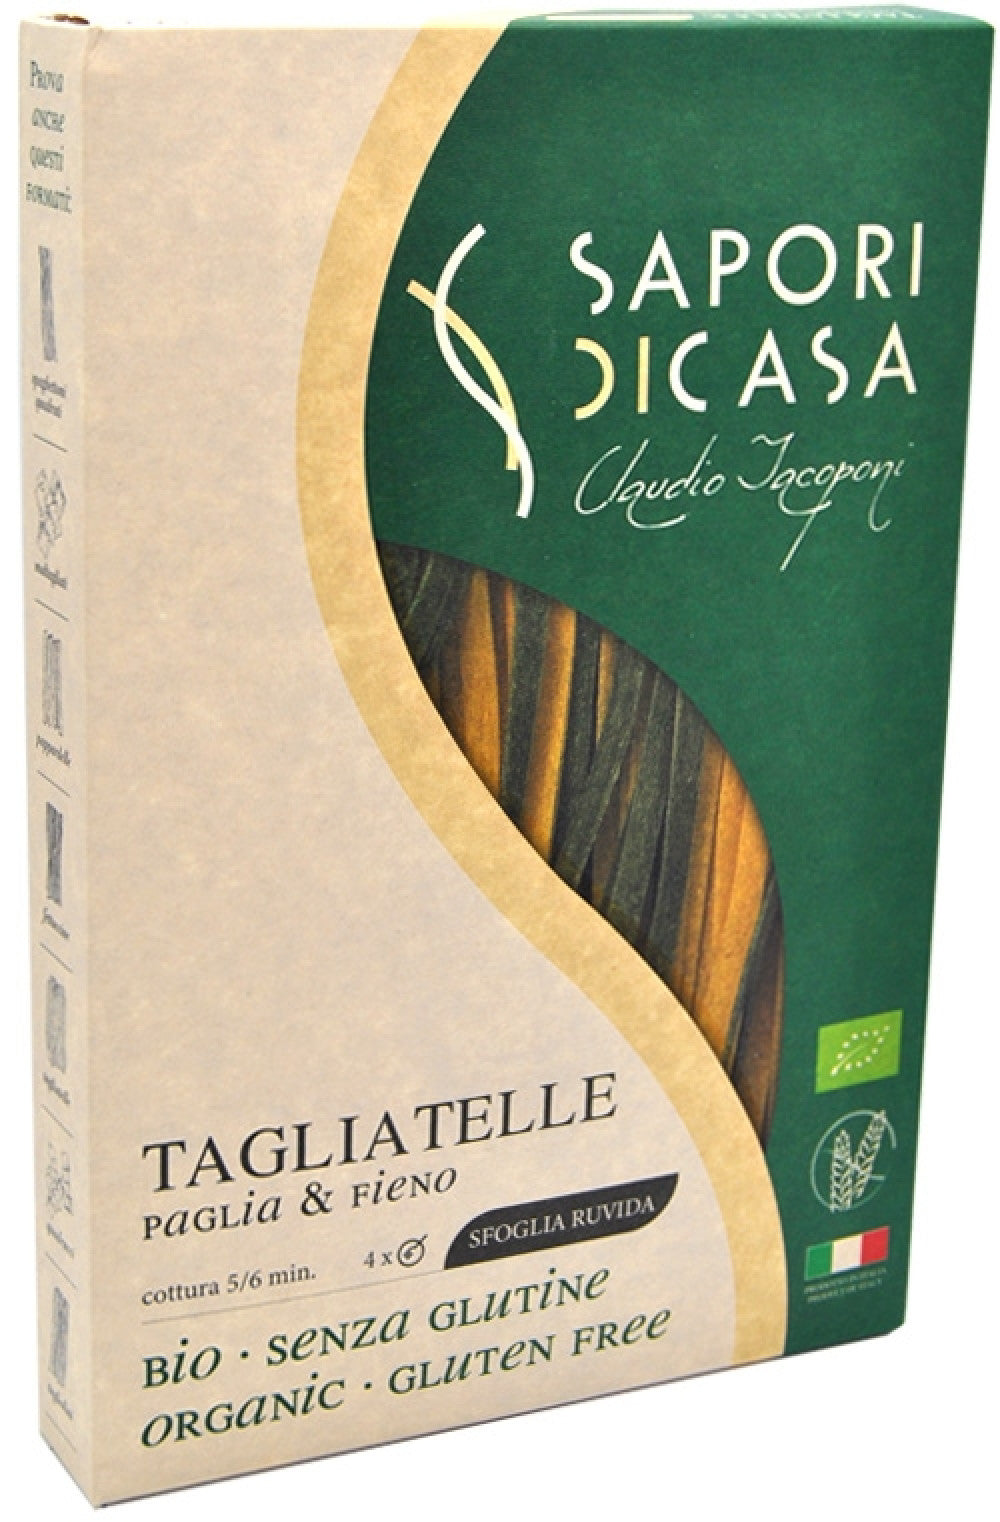 Organic Straw and Hay Tagliatelle Flavors of the House Gluten Free